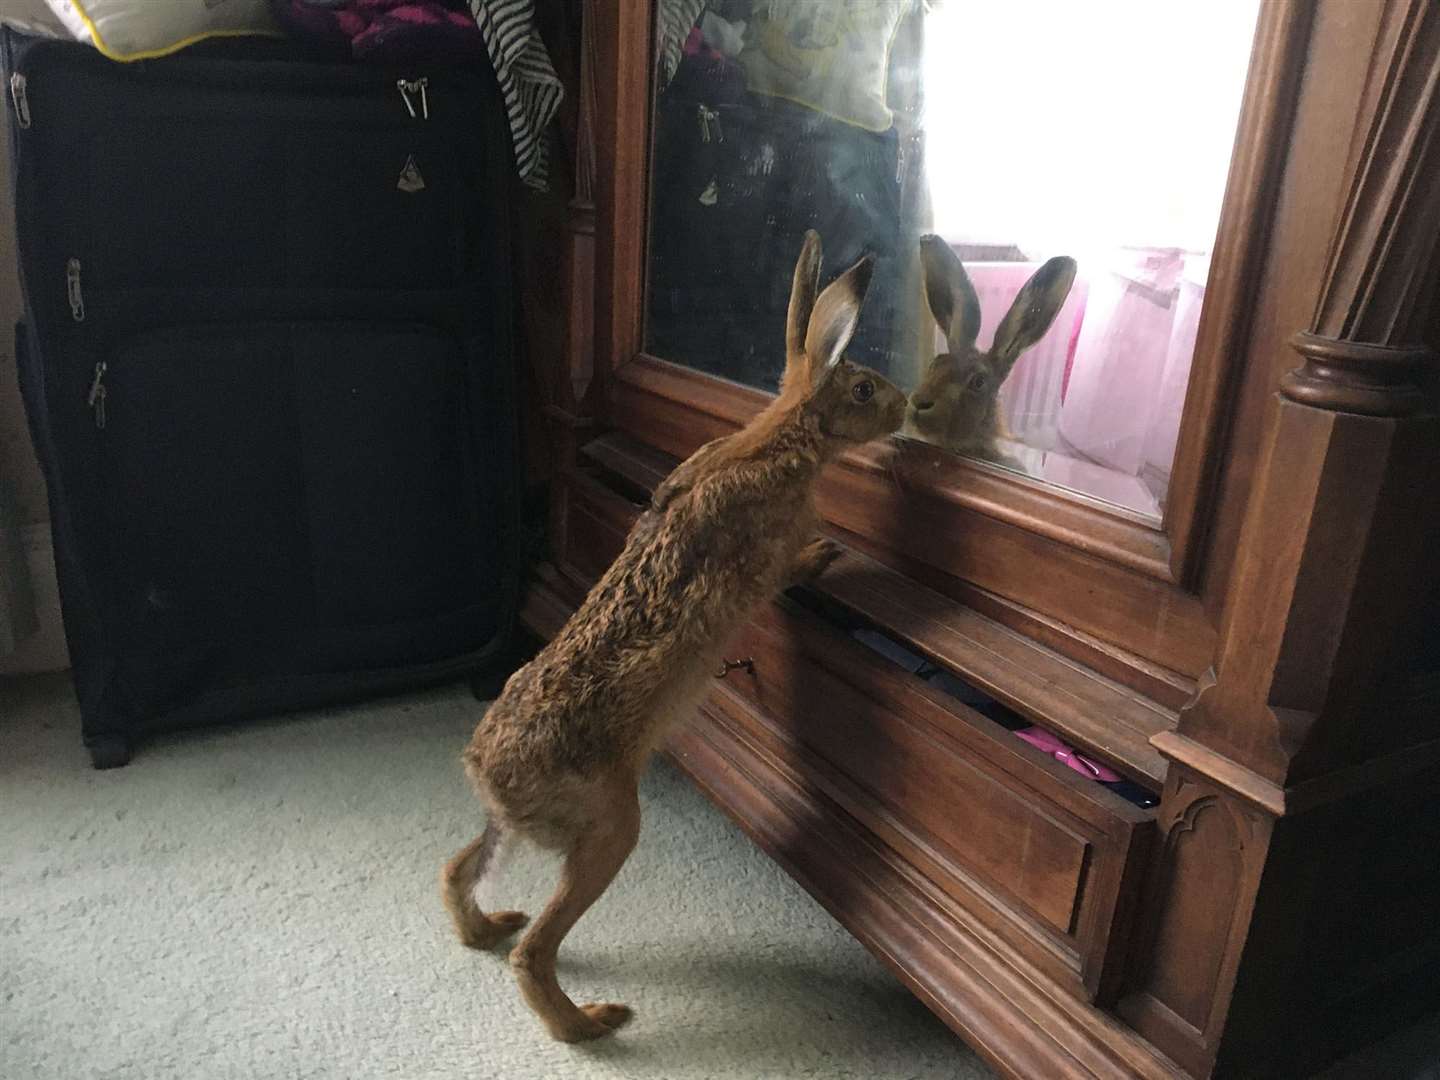 Clover inspected herself in the mirror during a recent venture into the house (Natasha Terry/PA)